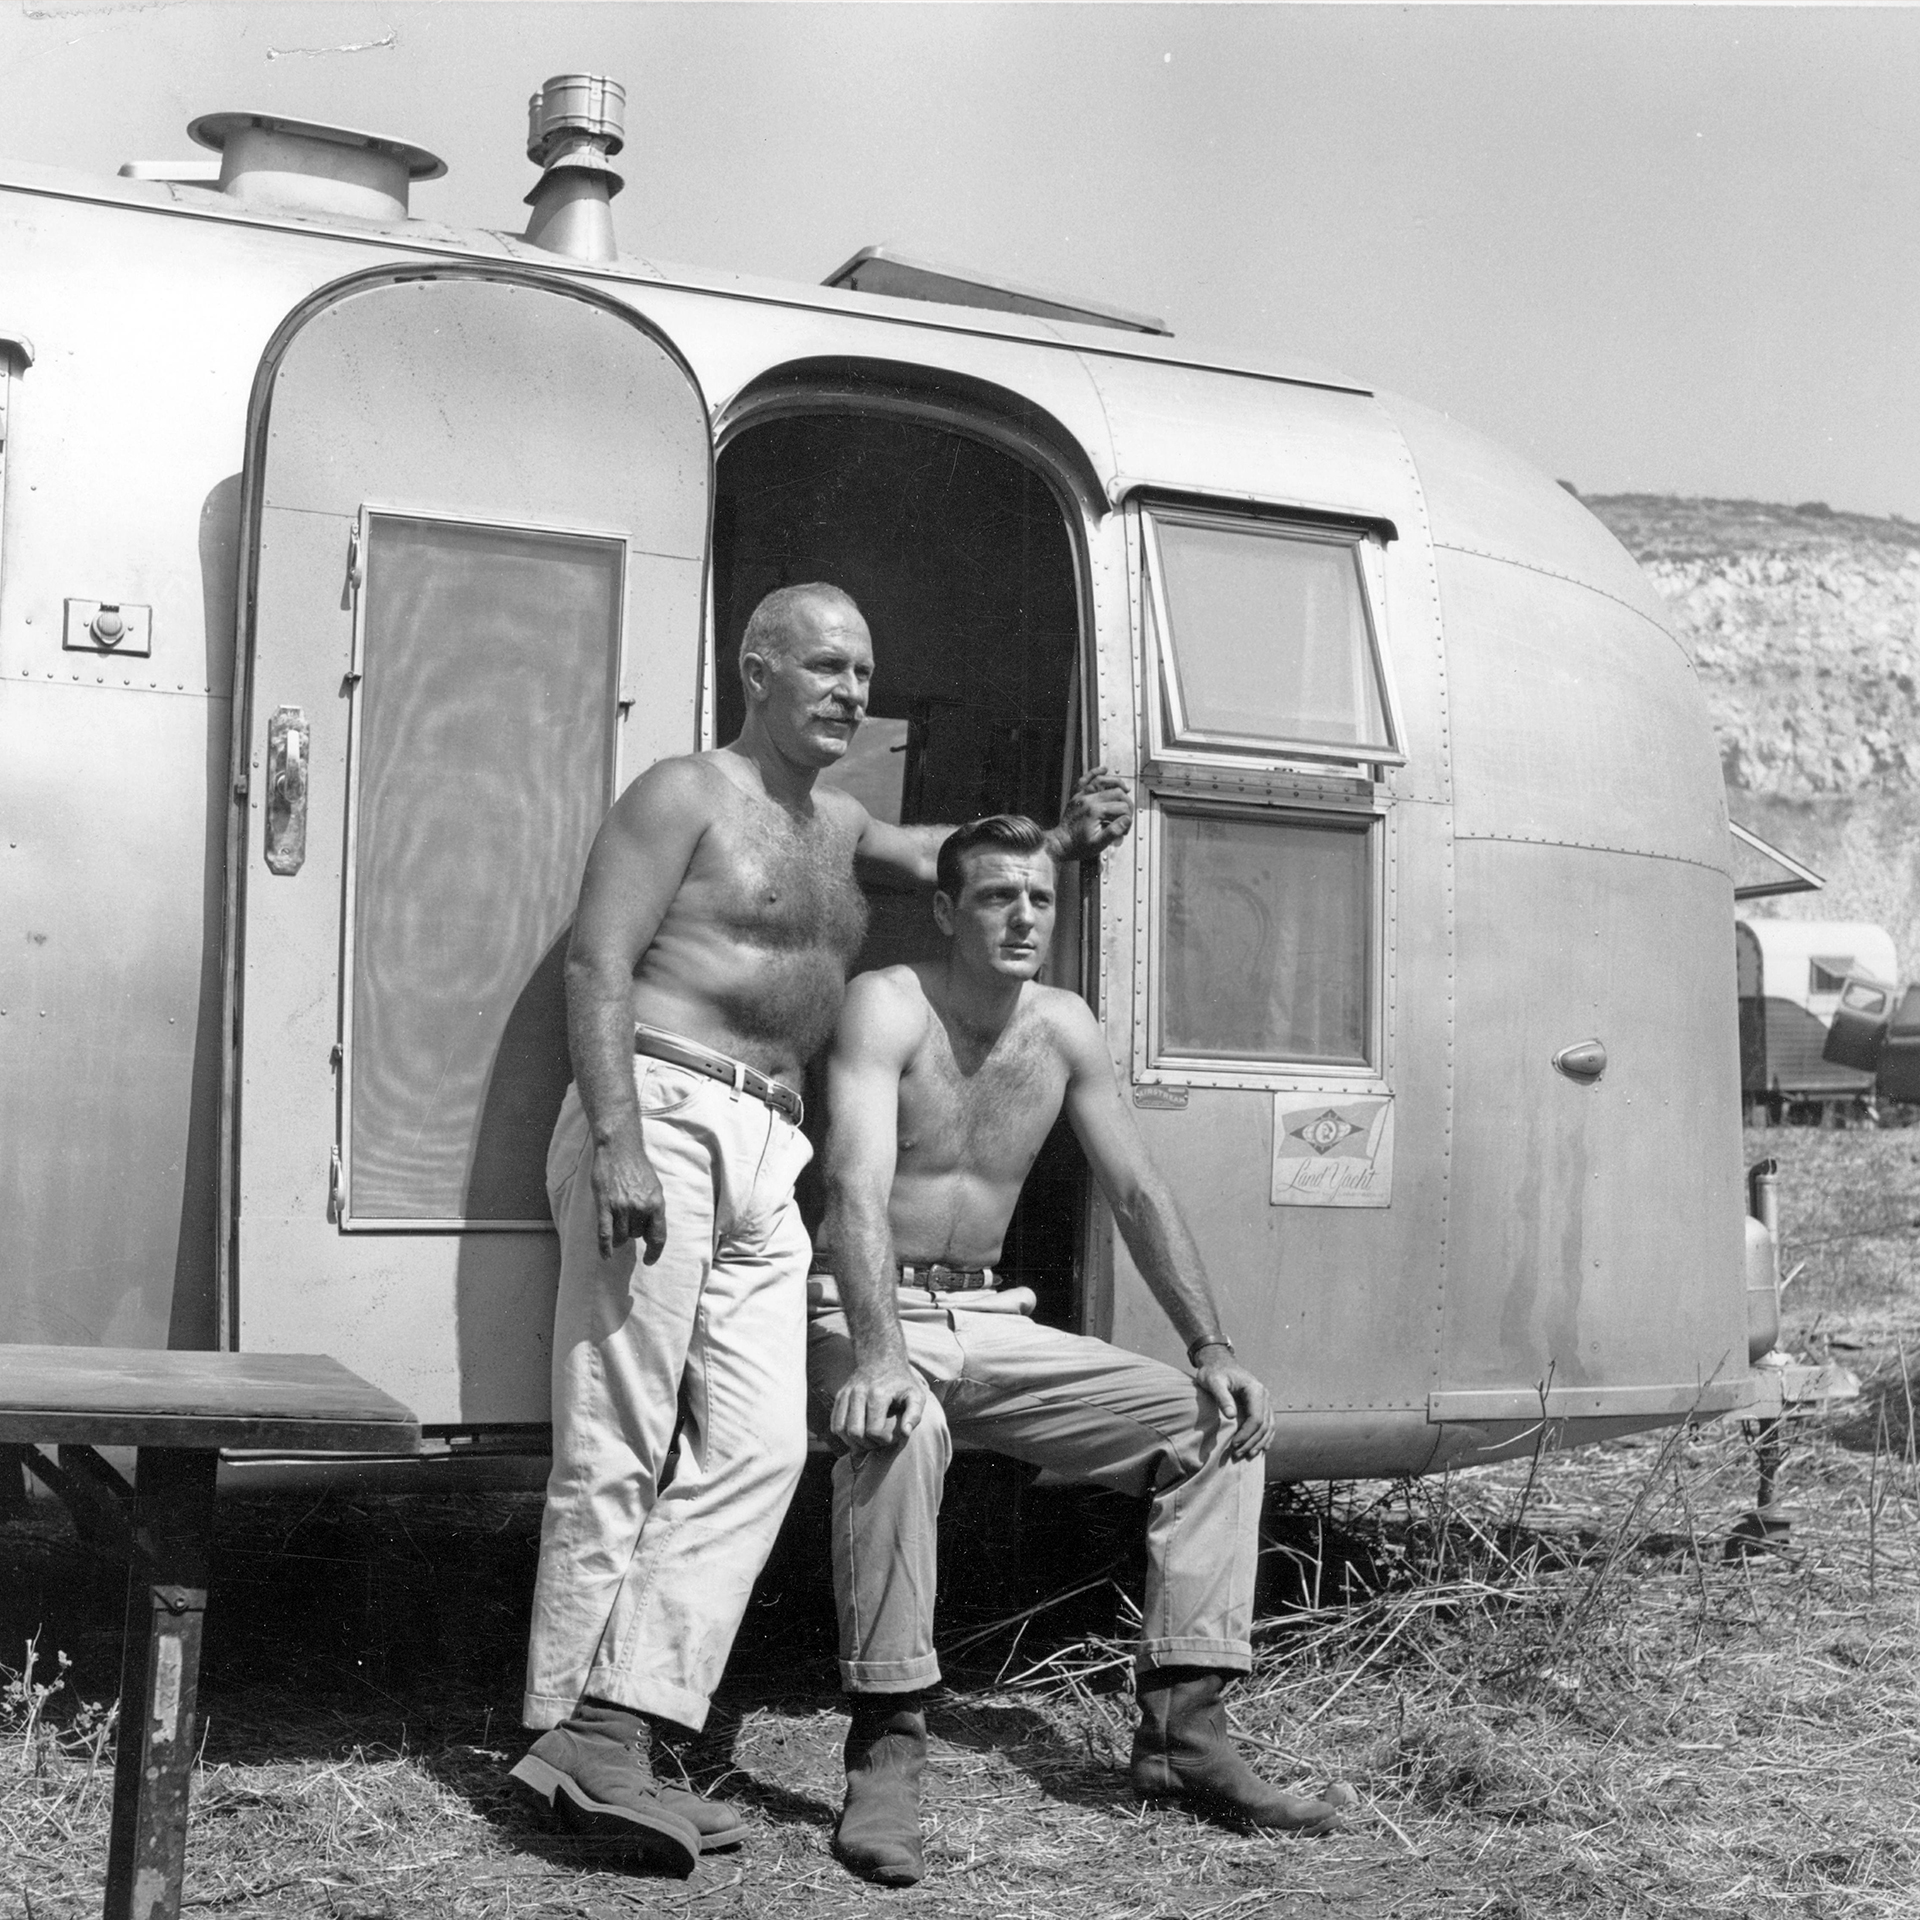 A vintage photo from an Airstream on set of the television show The Troubleshooters.